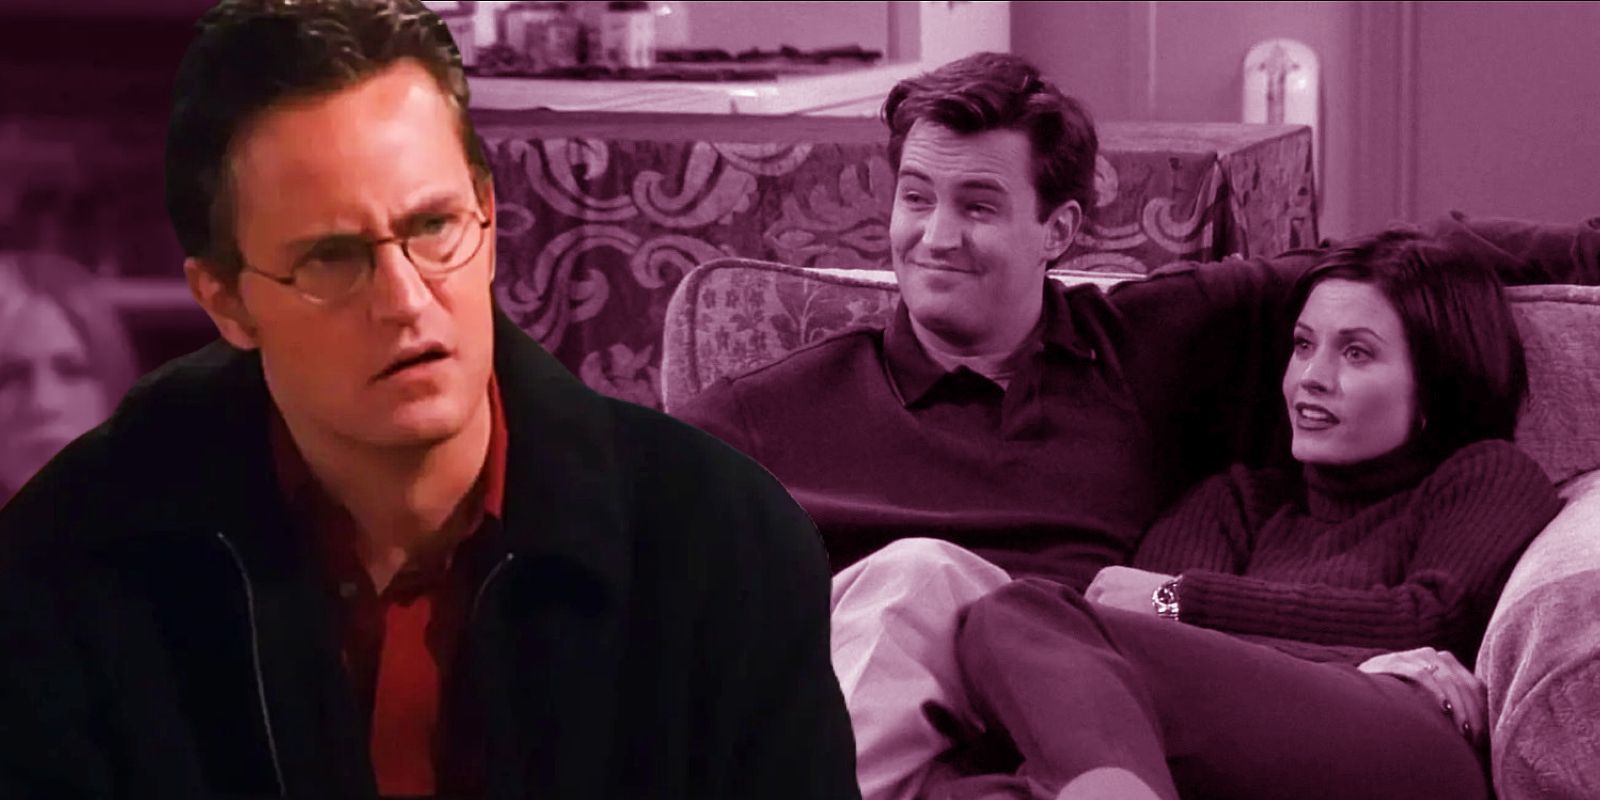 This collage shows Chandler from season 8 looking at Chandler and Monica sitting on a chair together.